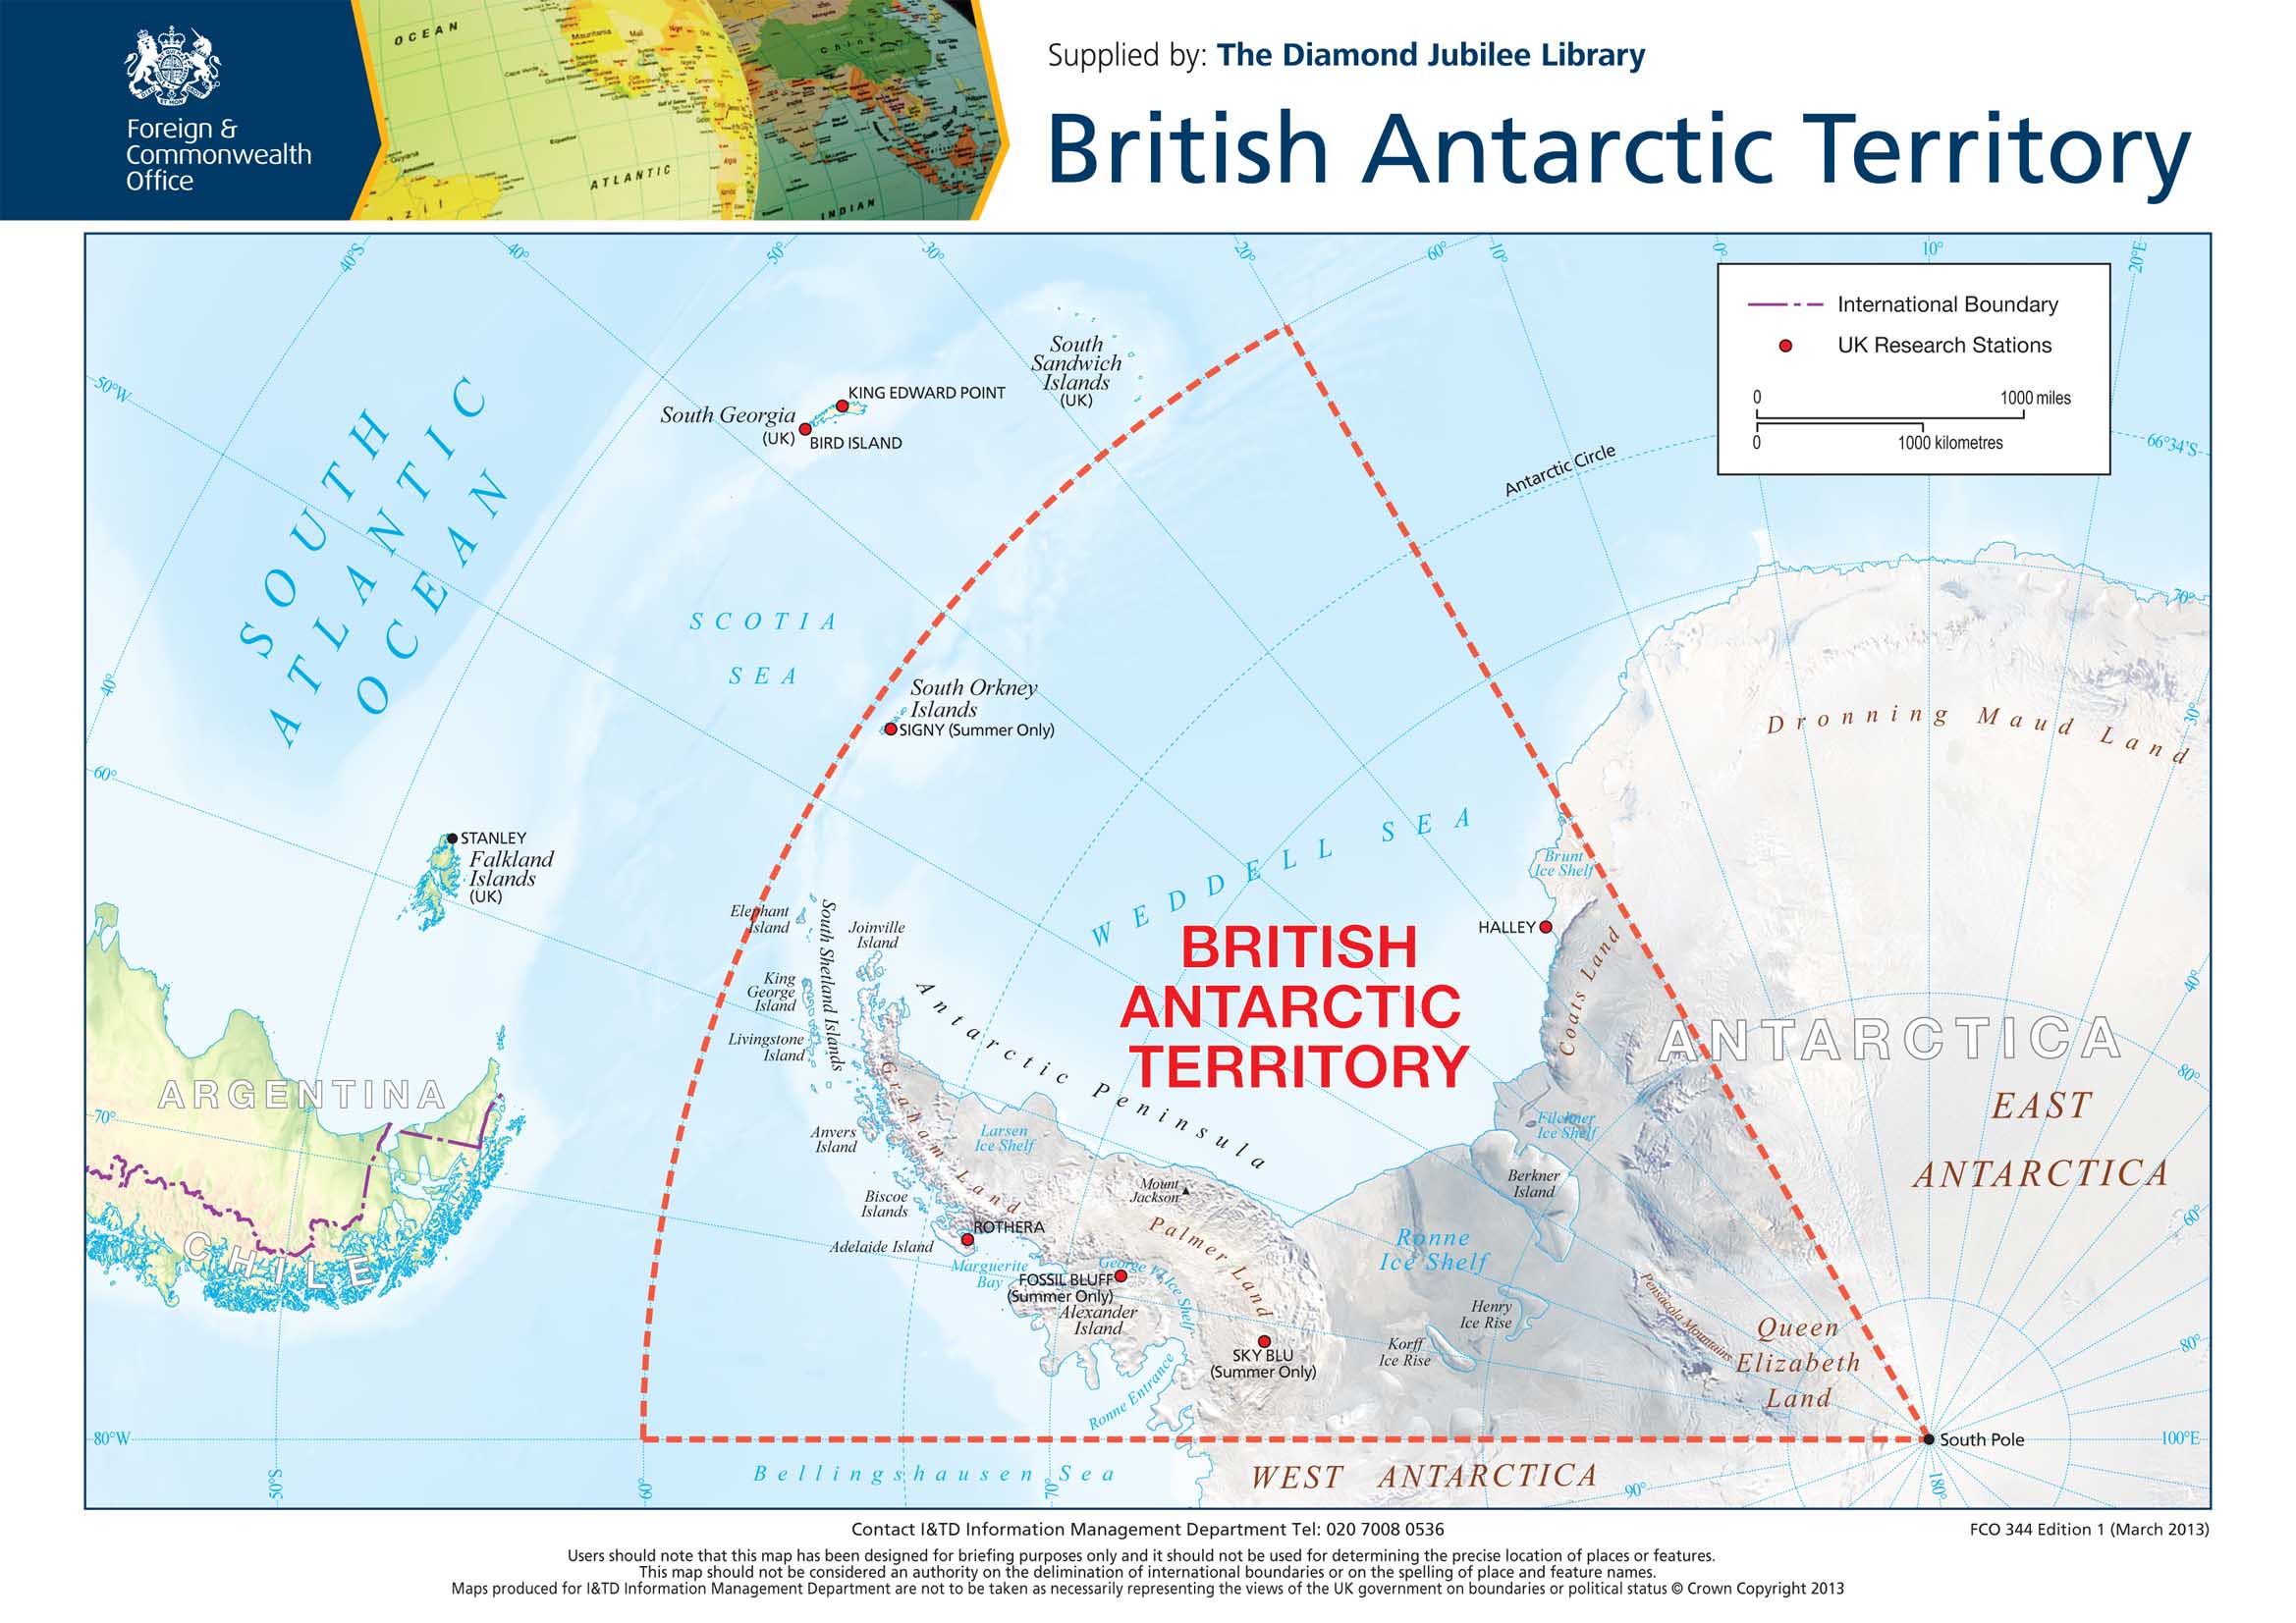 About the Territory - British Antarctic Territory